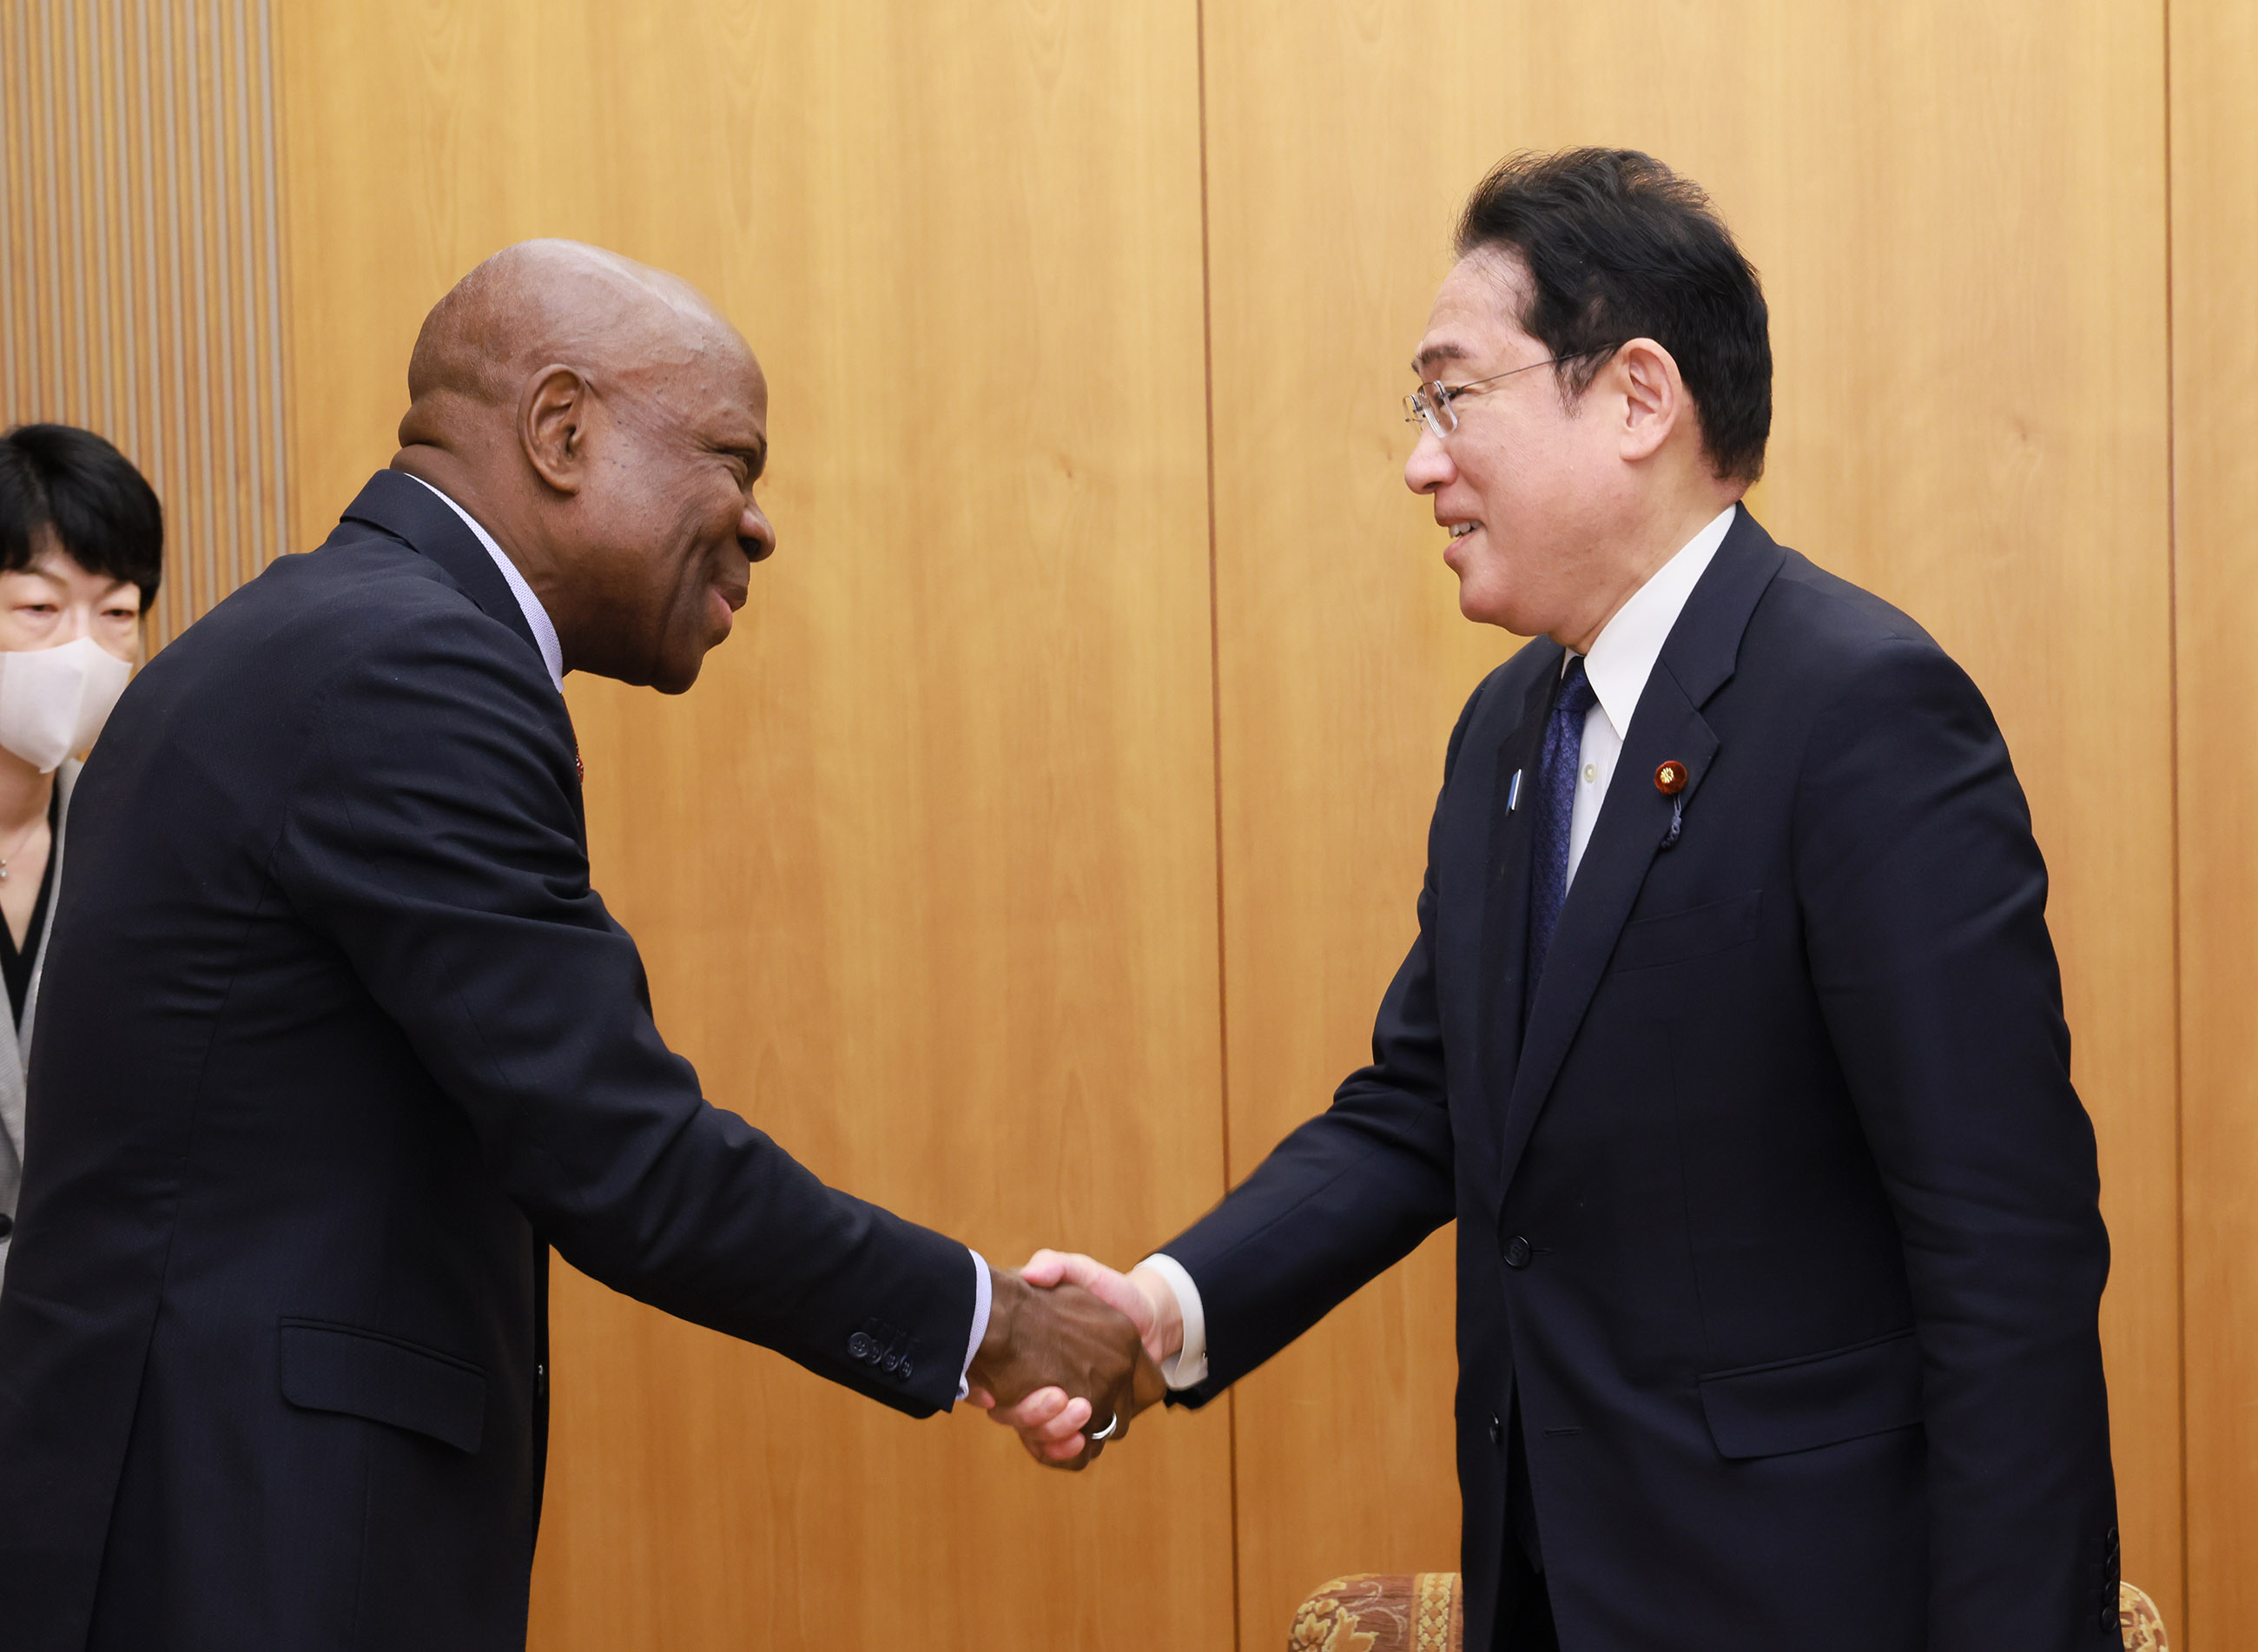 Courtesy Call from ILO Director-General Houngbo